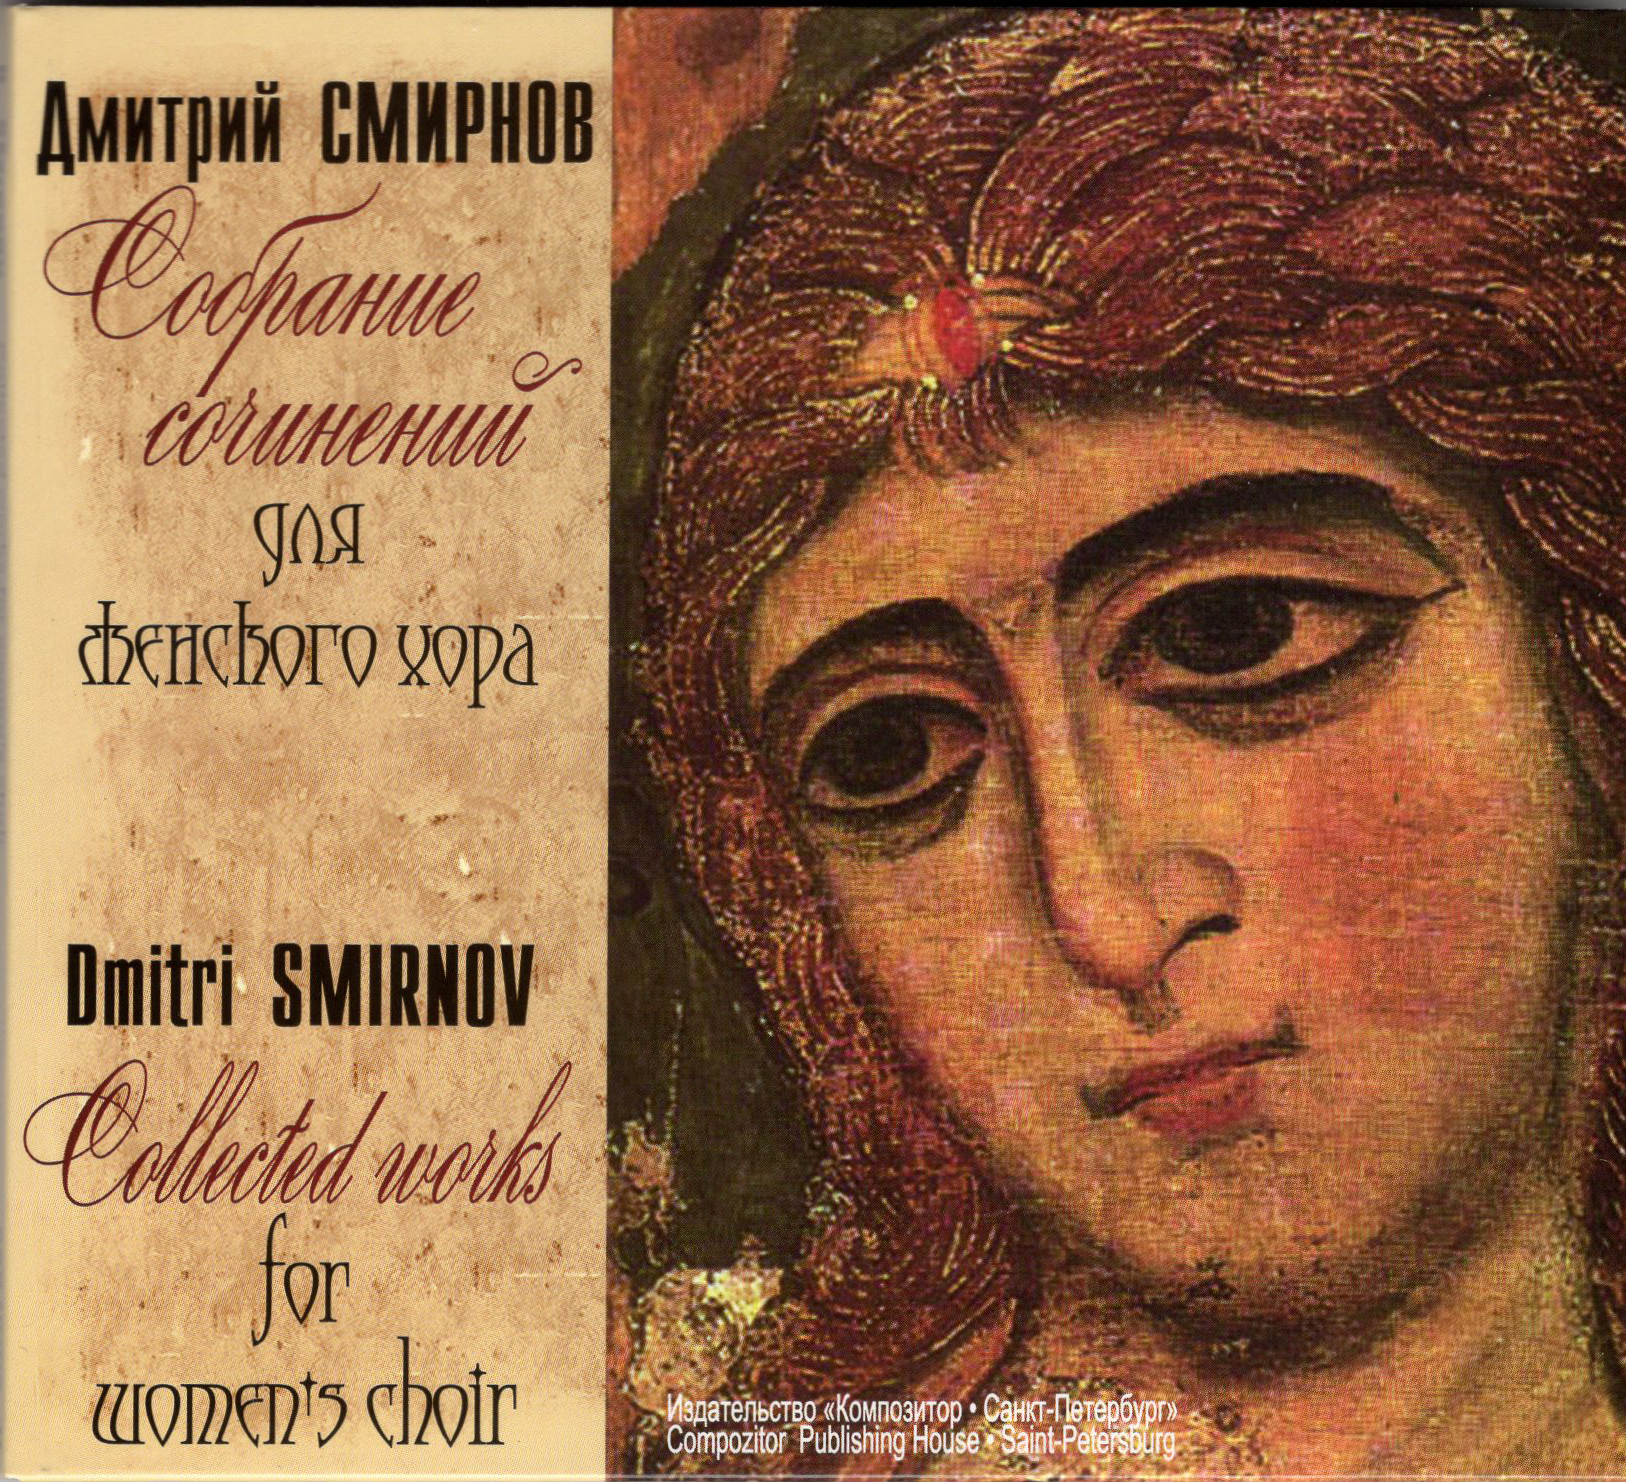 Smirnov S. Collected Works for Women's Choir (CD)